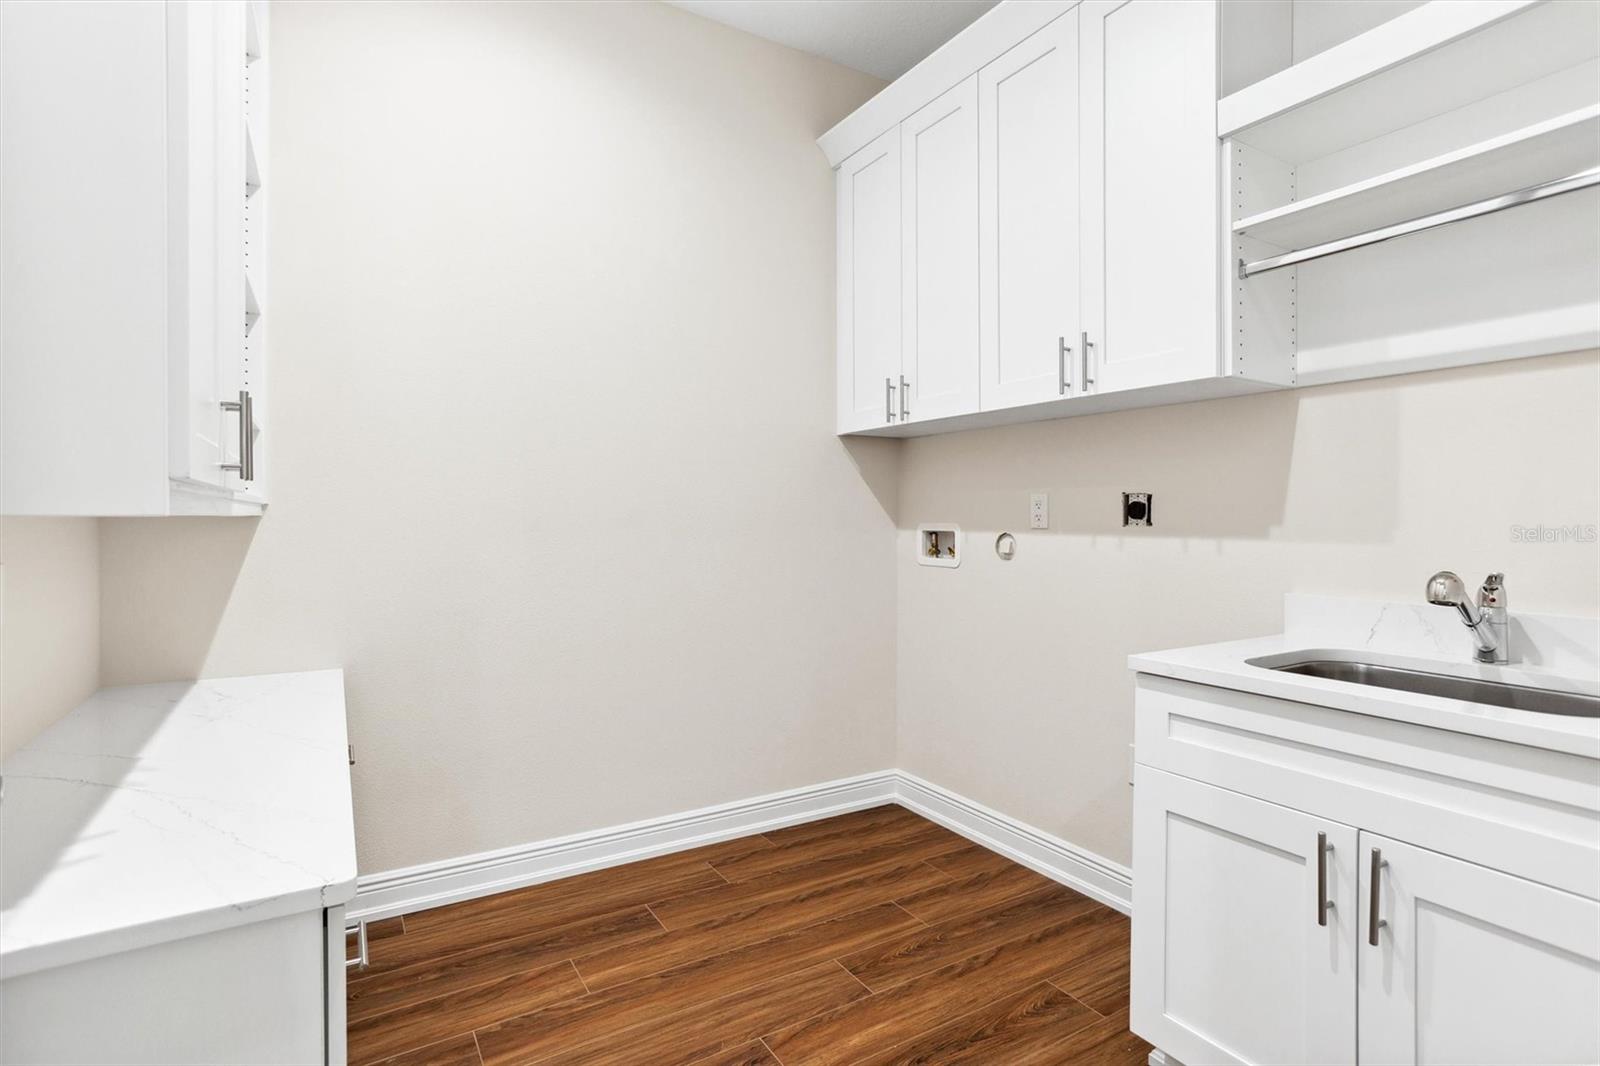 Laundry Room with custom built in cabinets including desk area.